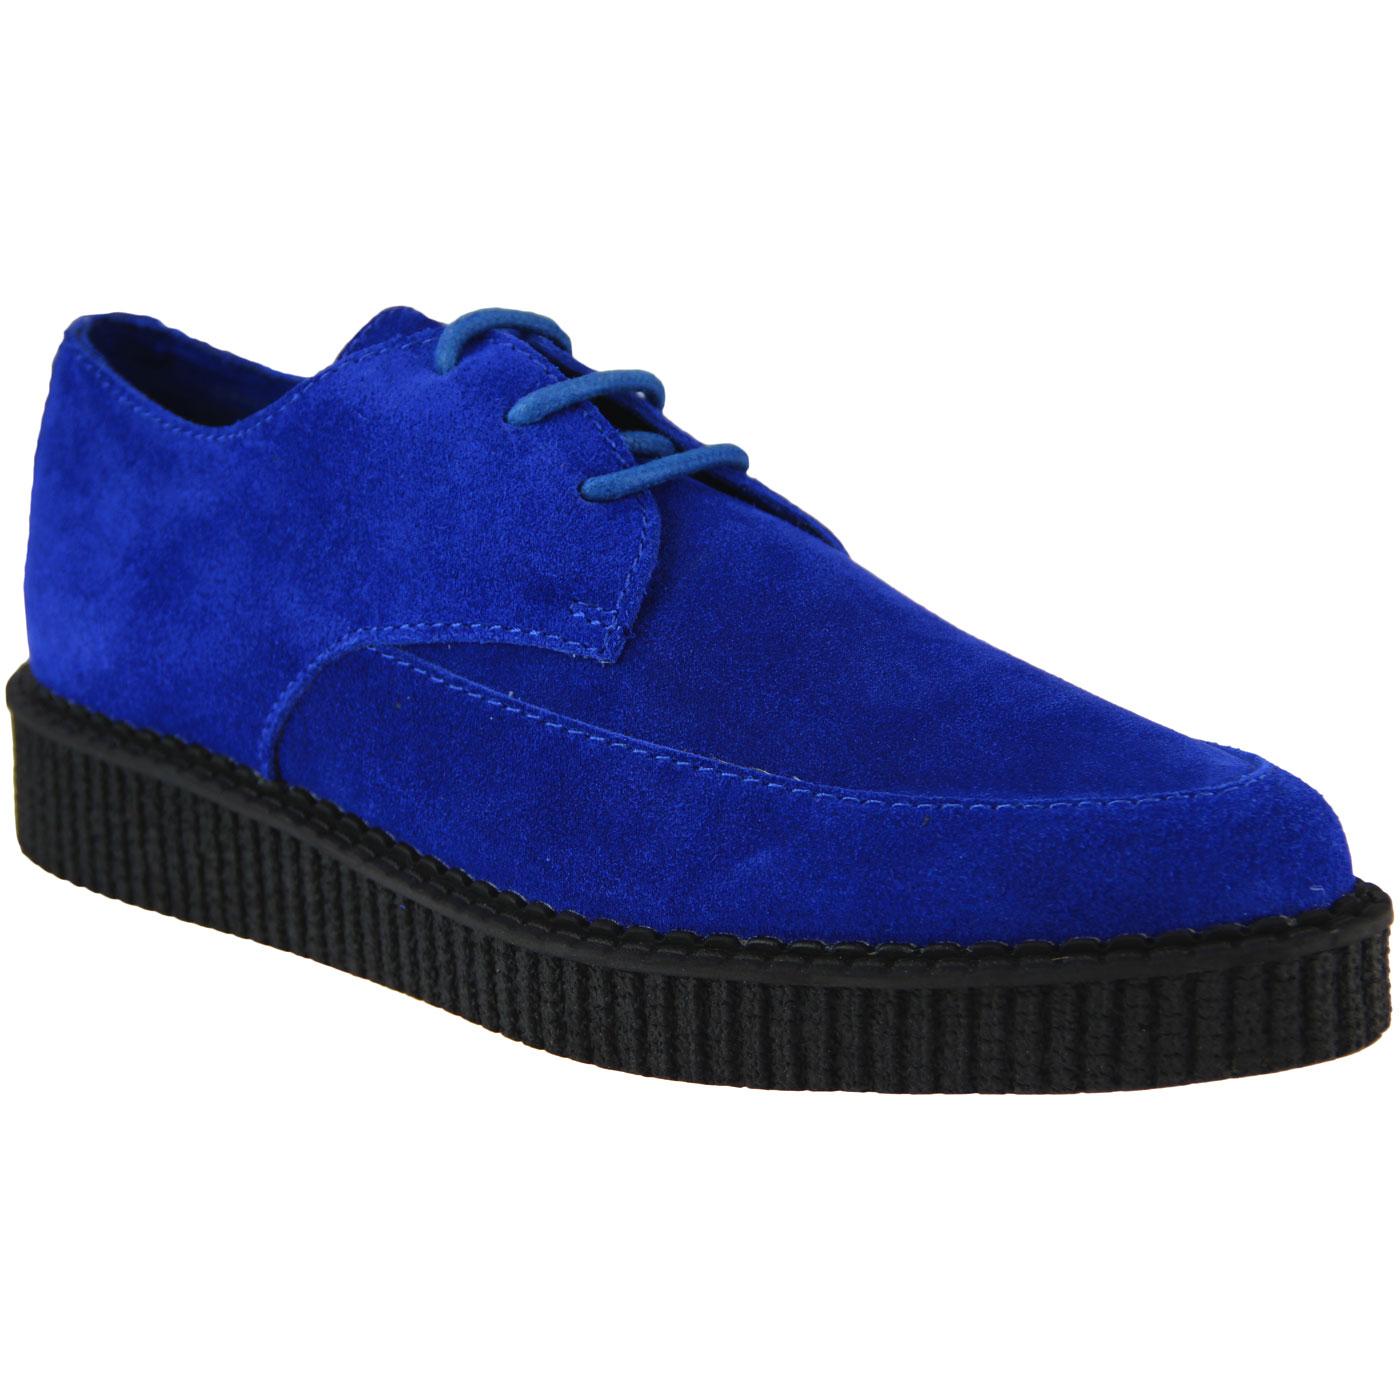 brothel creepers womens shoes